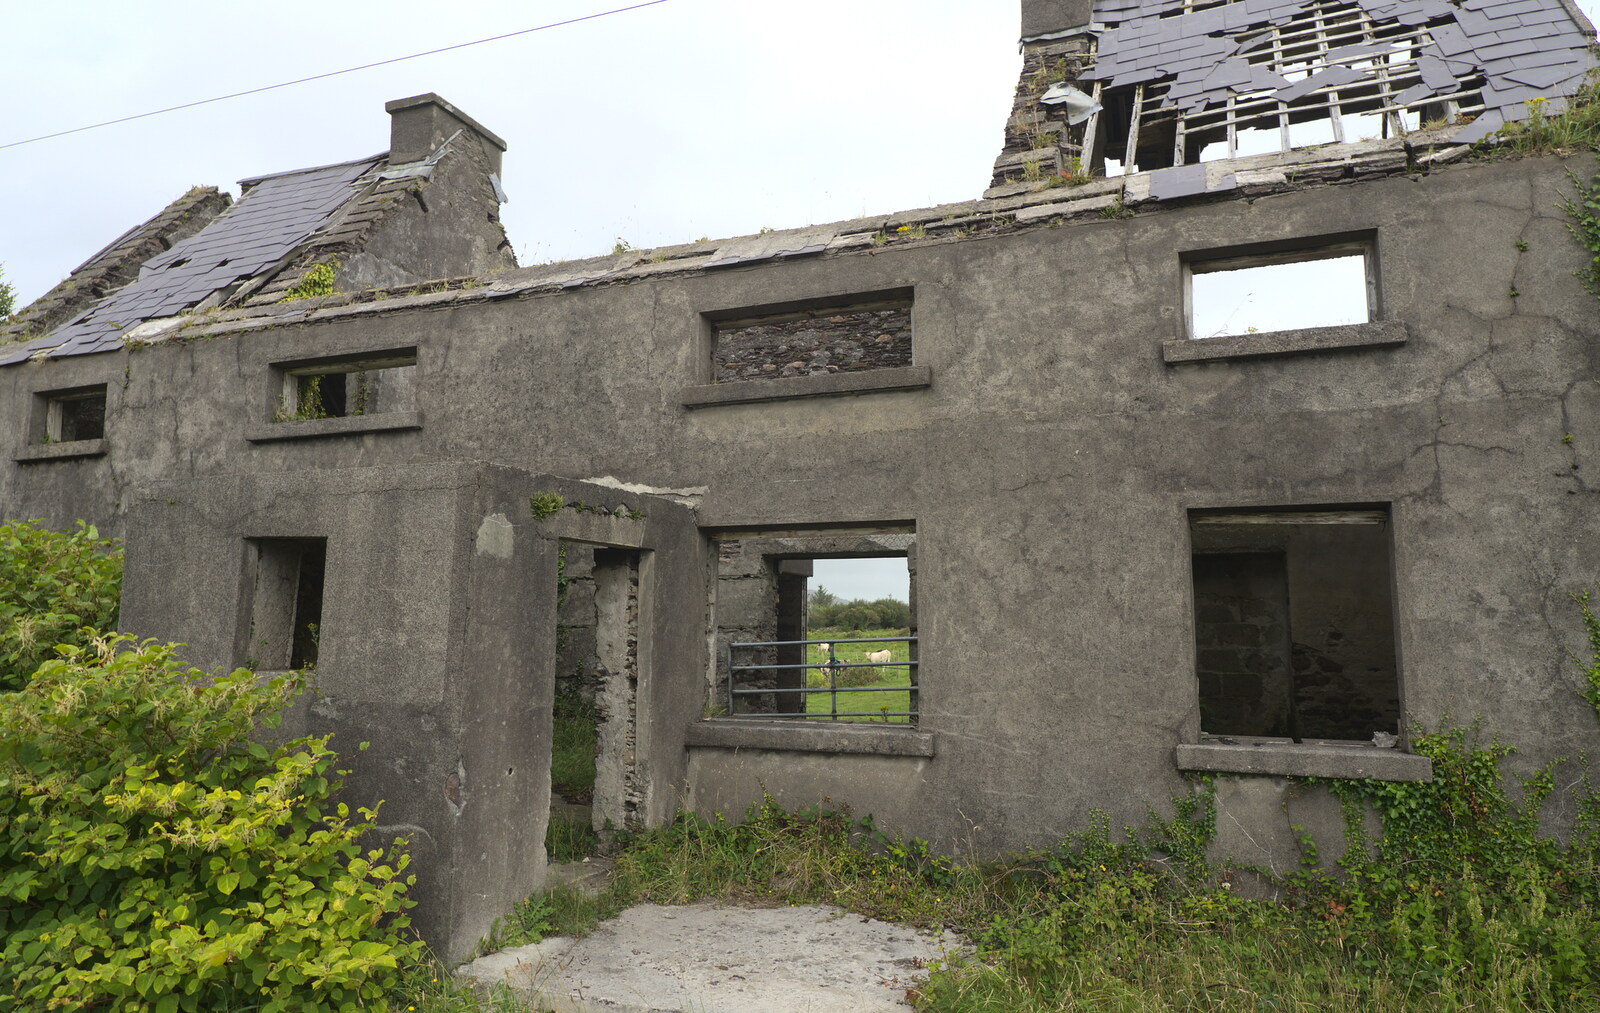 This derelict house still has some roof left from Staigue Fort and the Beach, Kerry, Ireland - 2nd August 2017